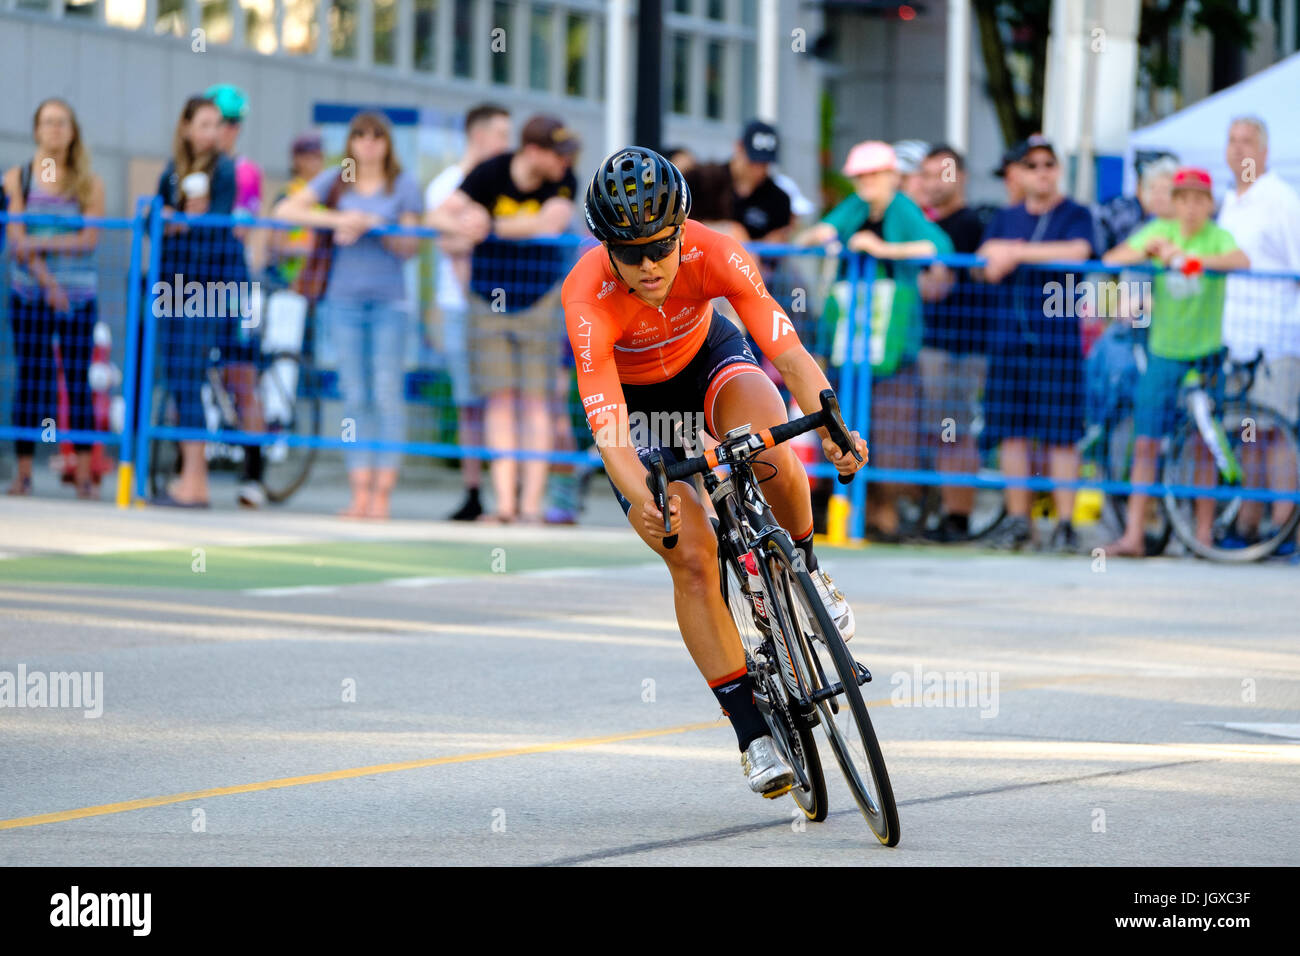 New Westminster, British Columbia, Canada. 11st July, 2017. Kristi Lay from Montreal, Canada wins the pro women's race at the New West Grand Prix. Joe Ng/Alamy Live News Stock Photo